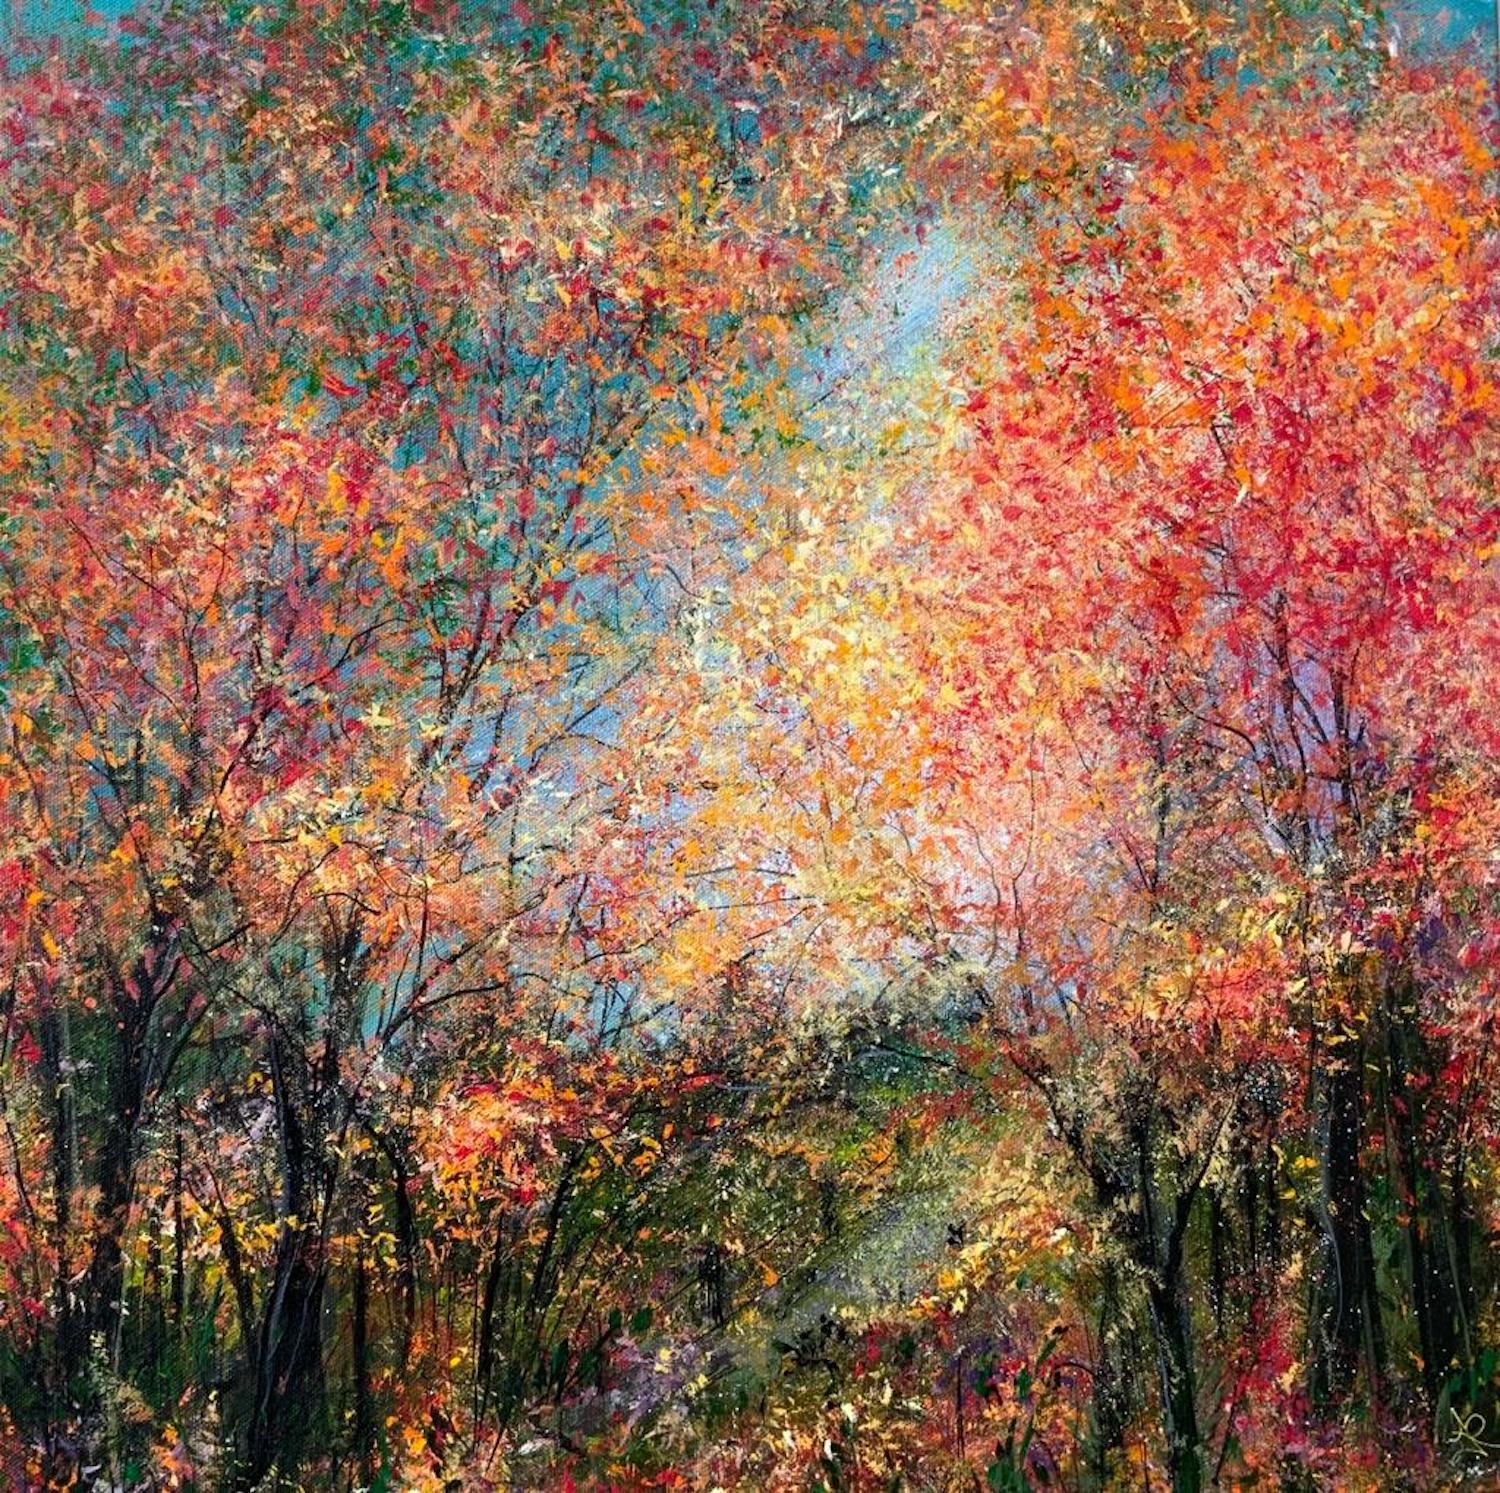 Autumn at Elnup Wood by Jan Rogers